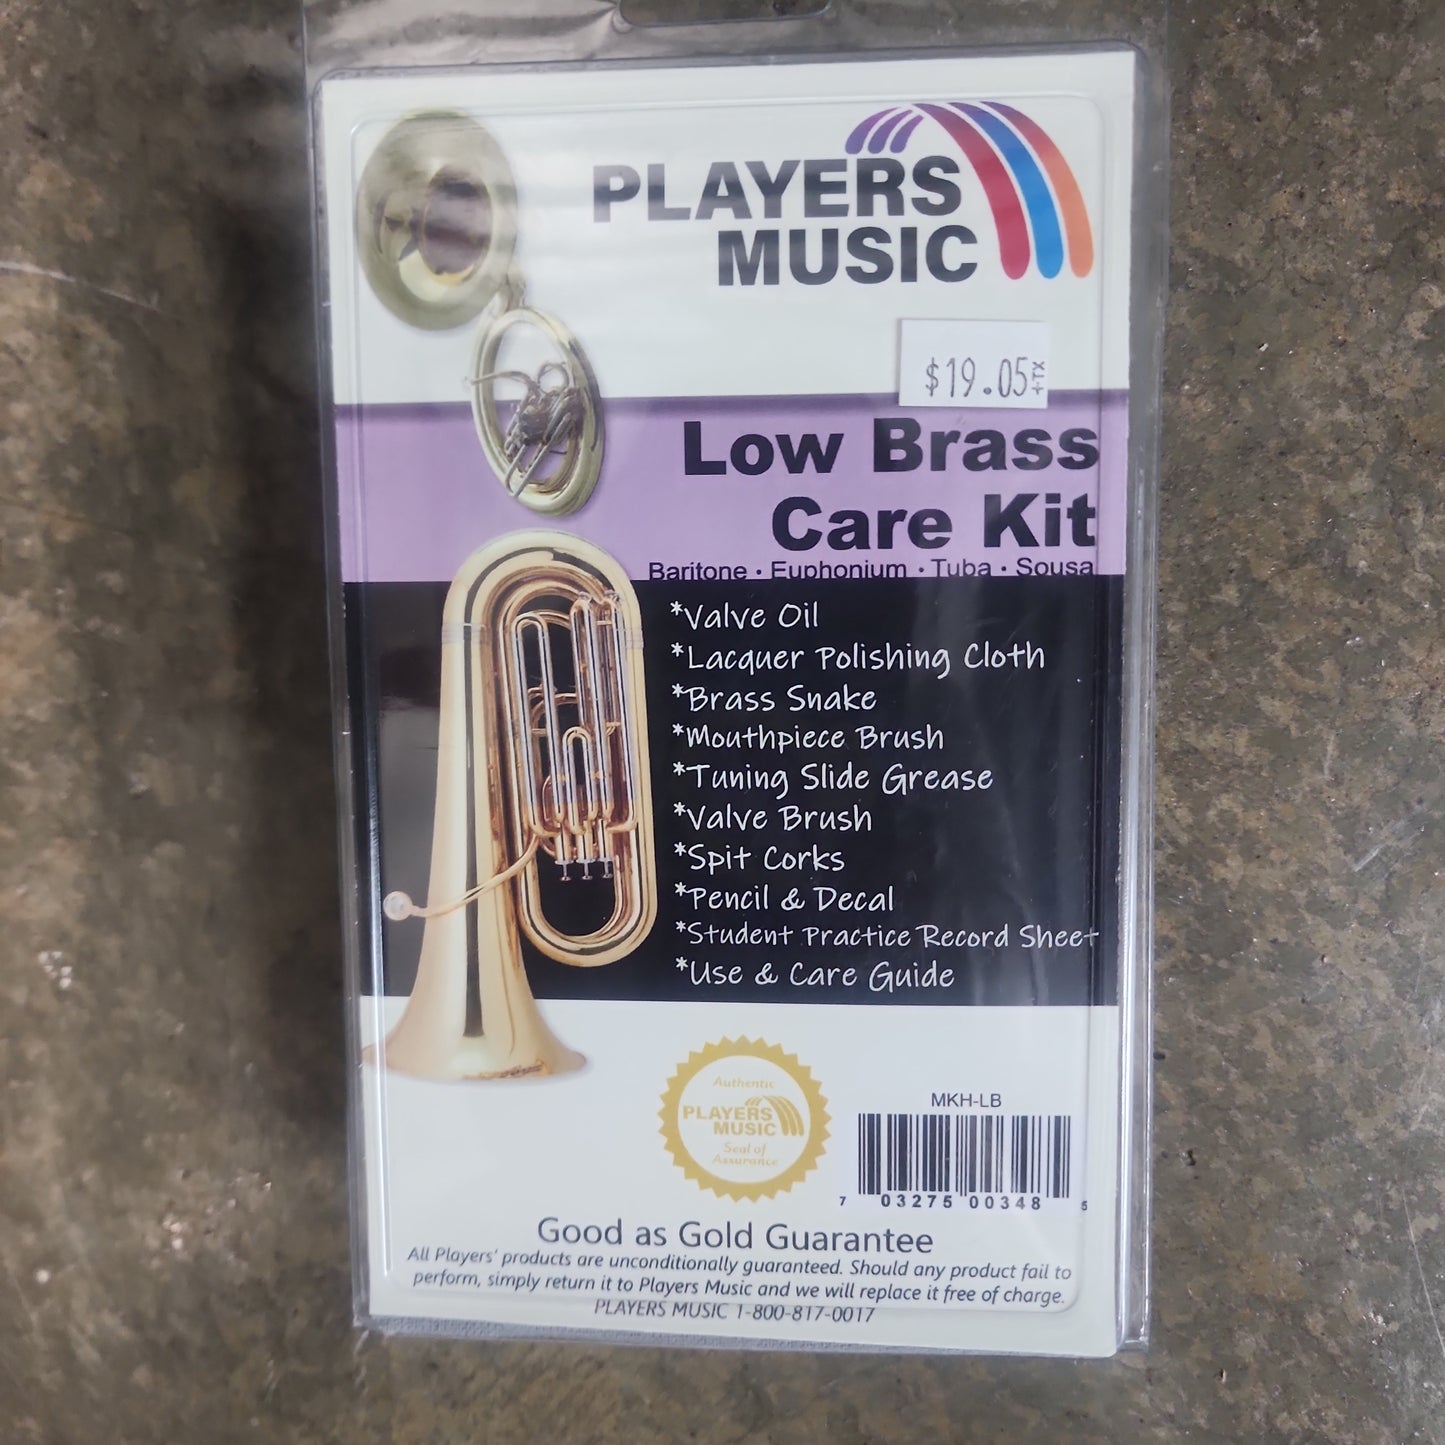 Players Music Low Brass Care Kit